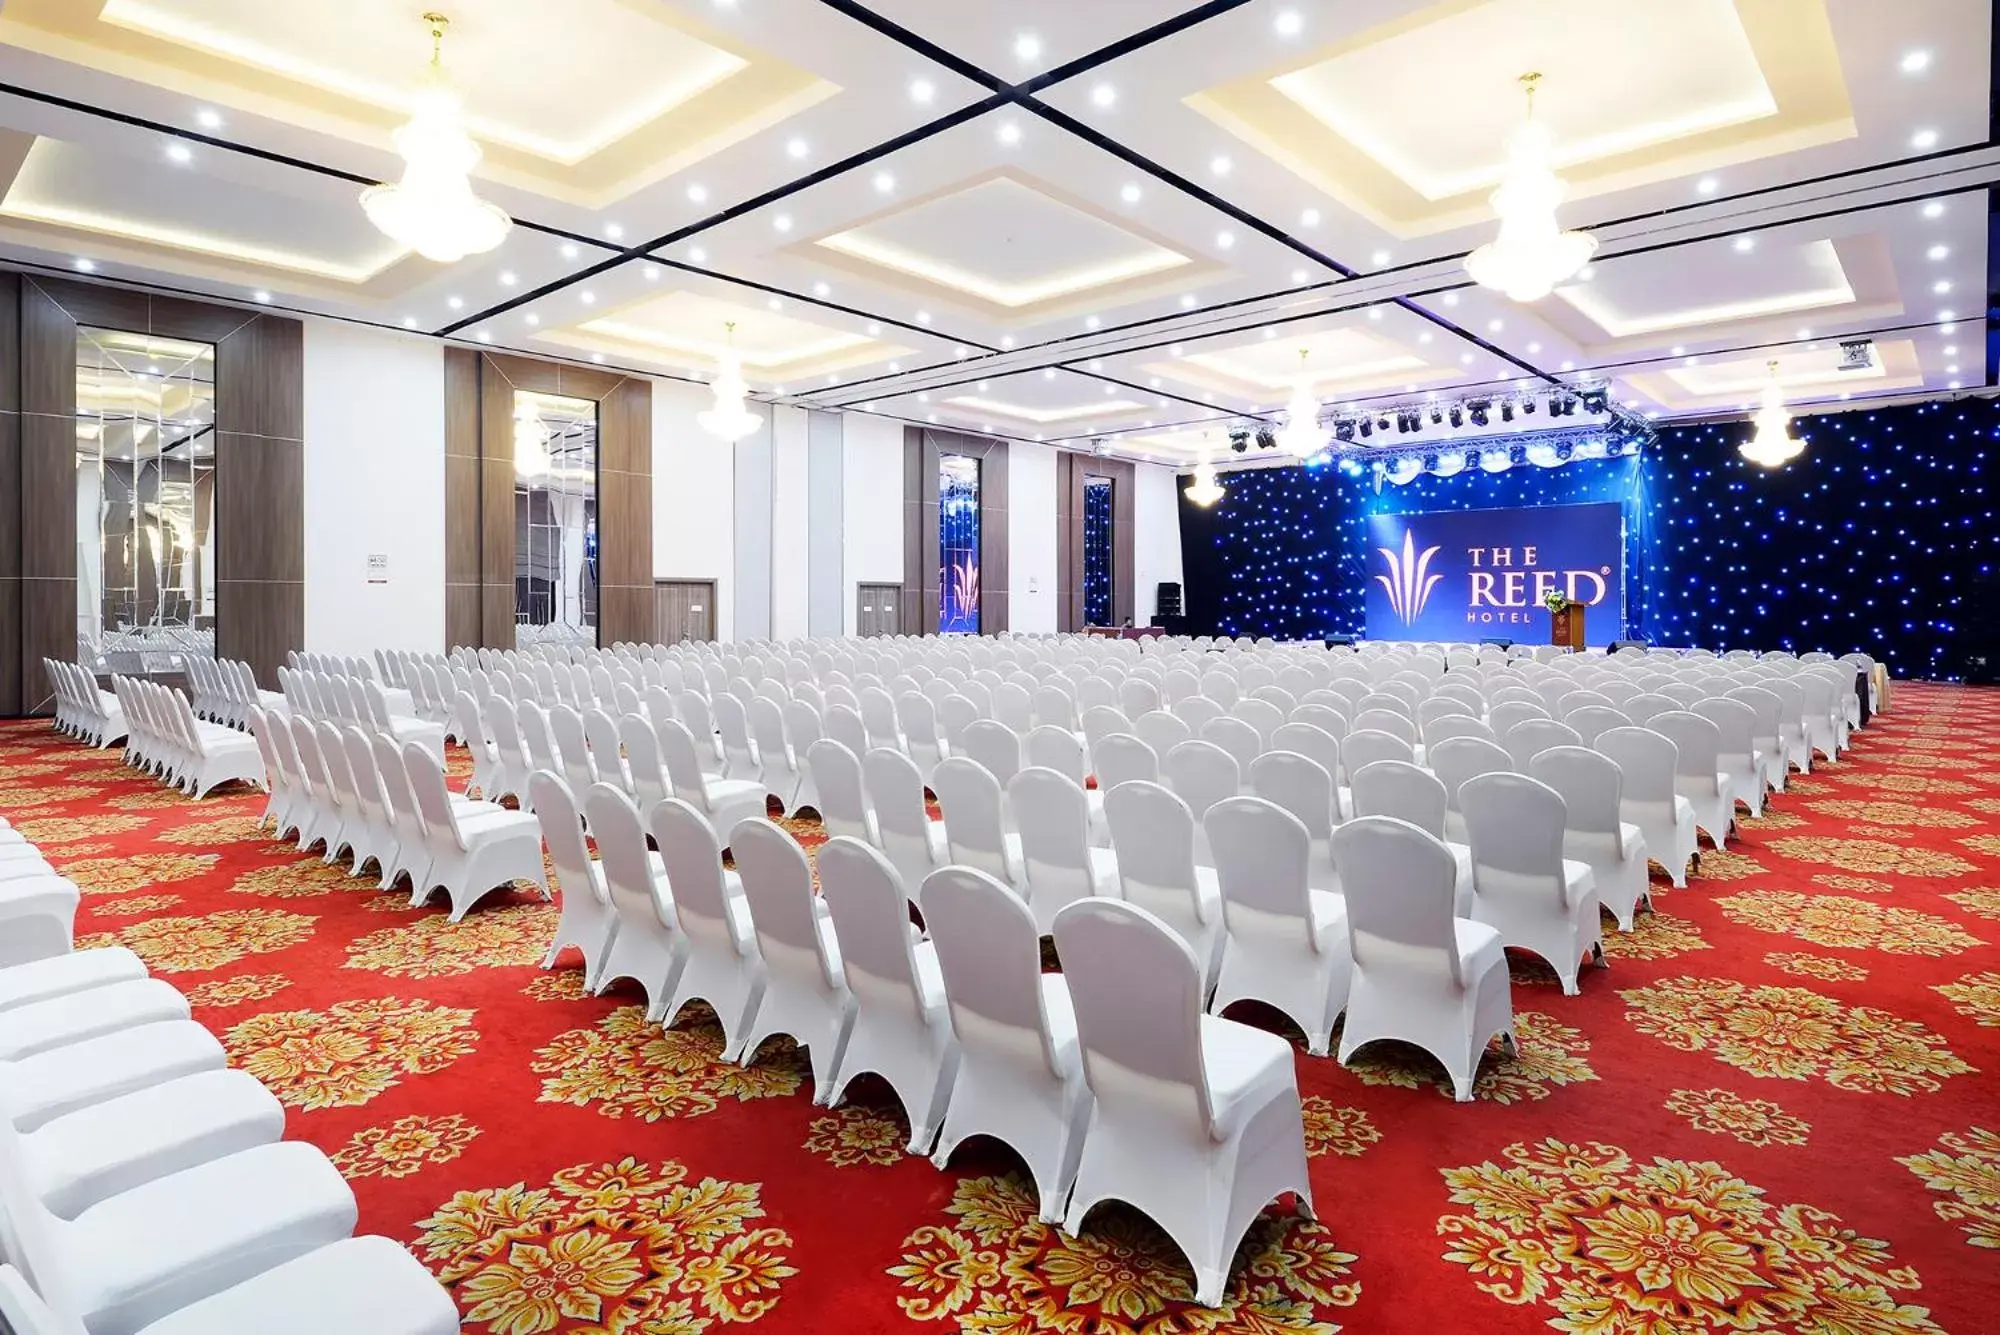 Banquet/Function facilities, Banquet Facilities in The Reed Hotel